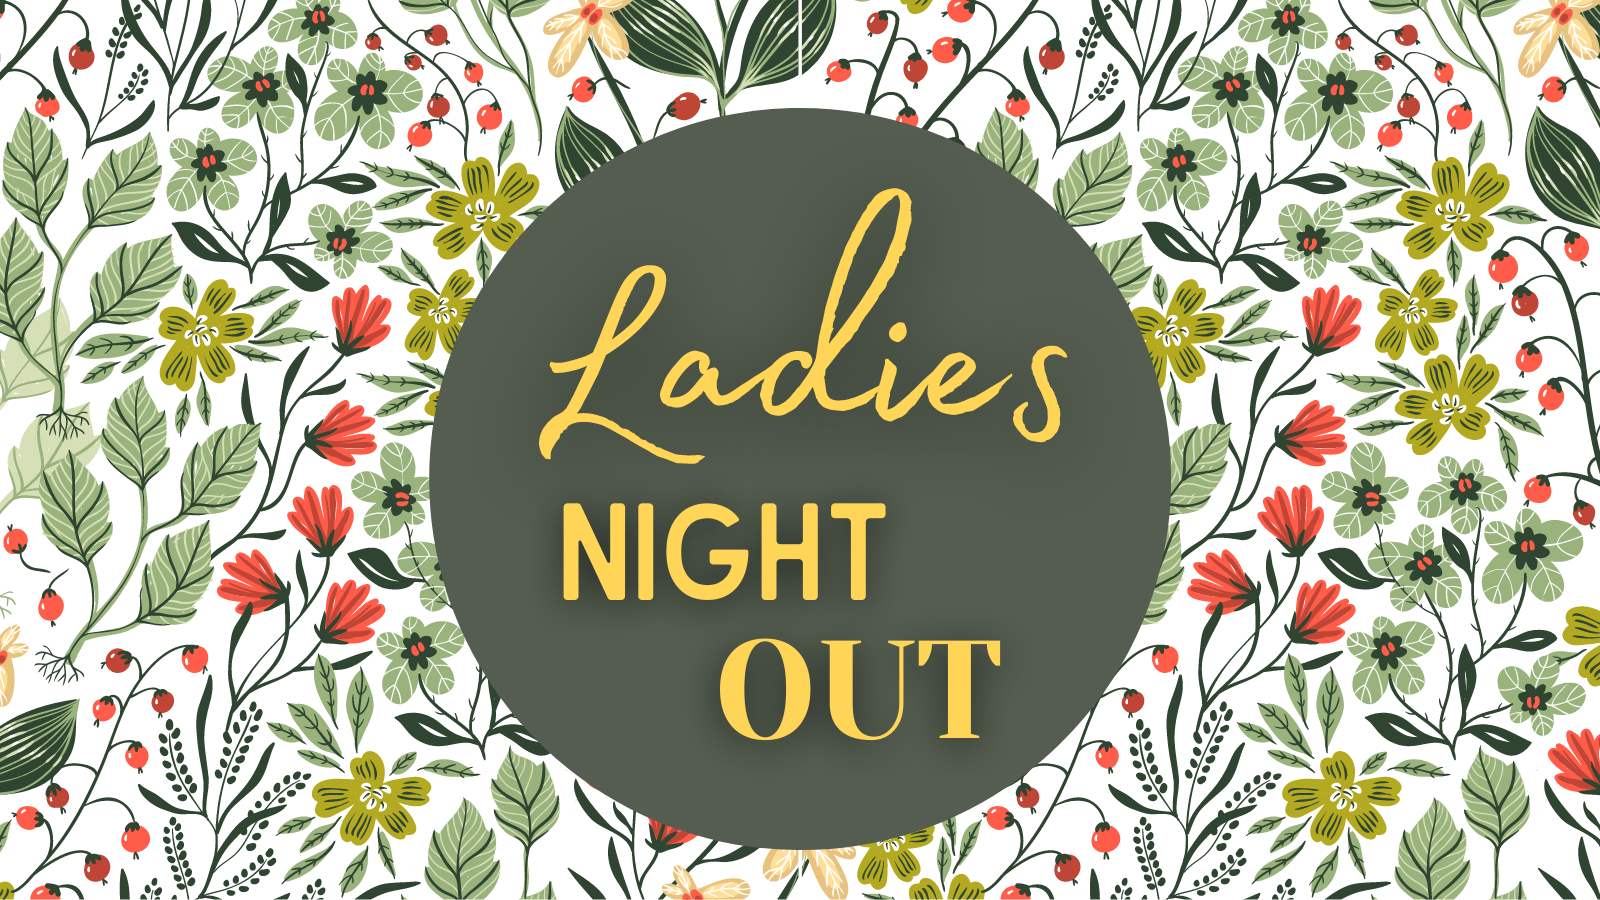 Copy of Ladies Night Out graphic (1) image